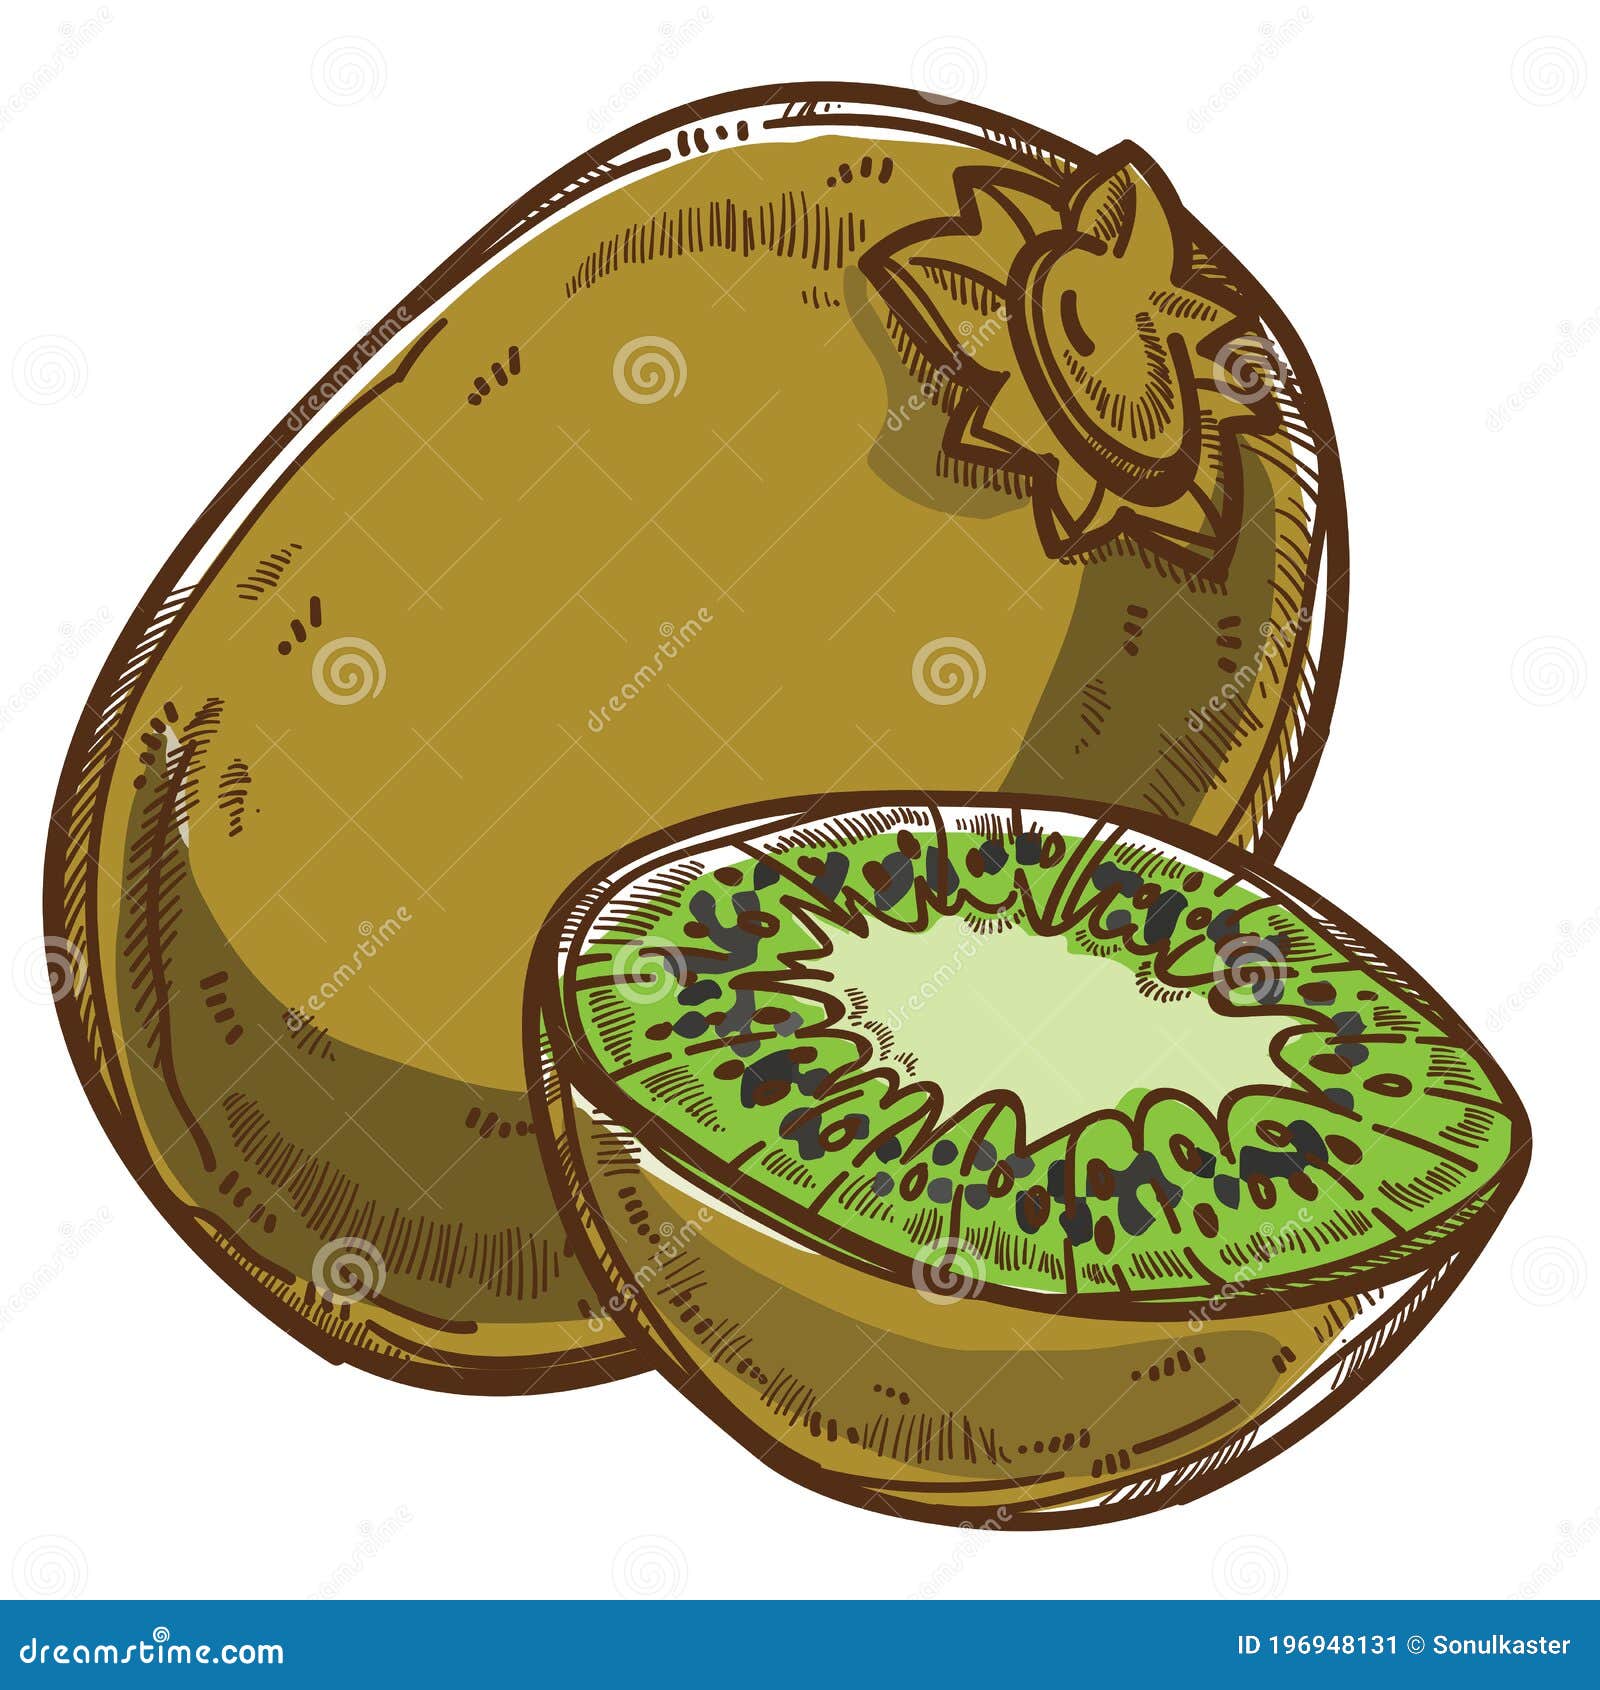 https://thumbs.dreamstime.com/z/kiwi-tropical-fruit-sliced-part-healthy-eating-vector-seeds-green-isolated-icon-berry-delicious-chopped-organic-ingredient-196948131.jpg